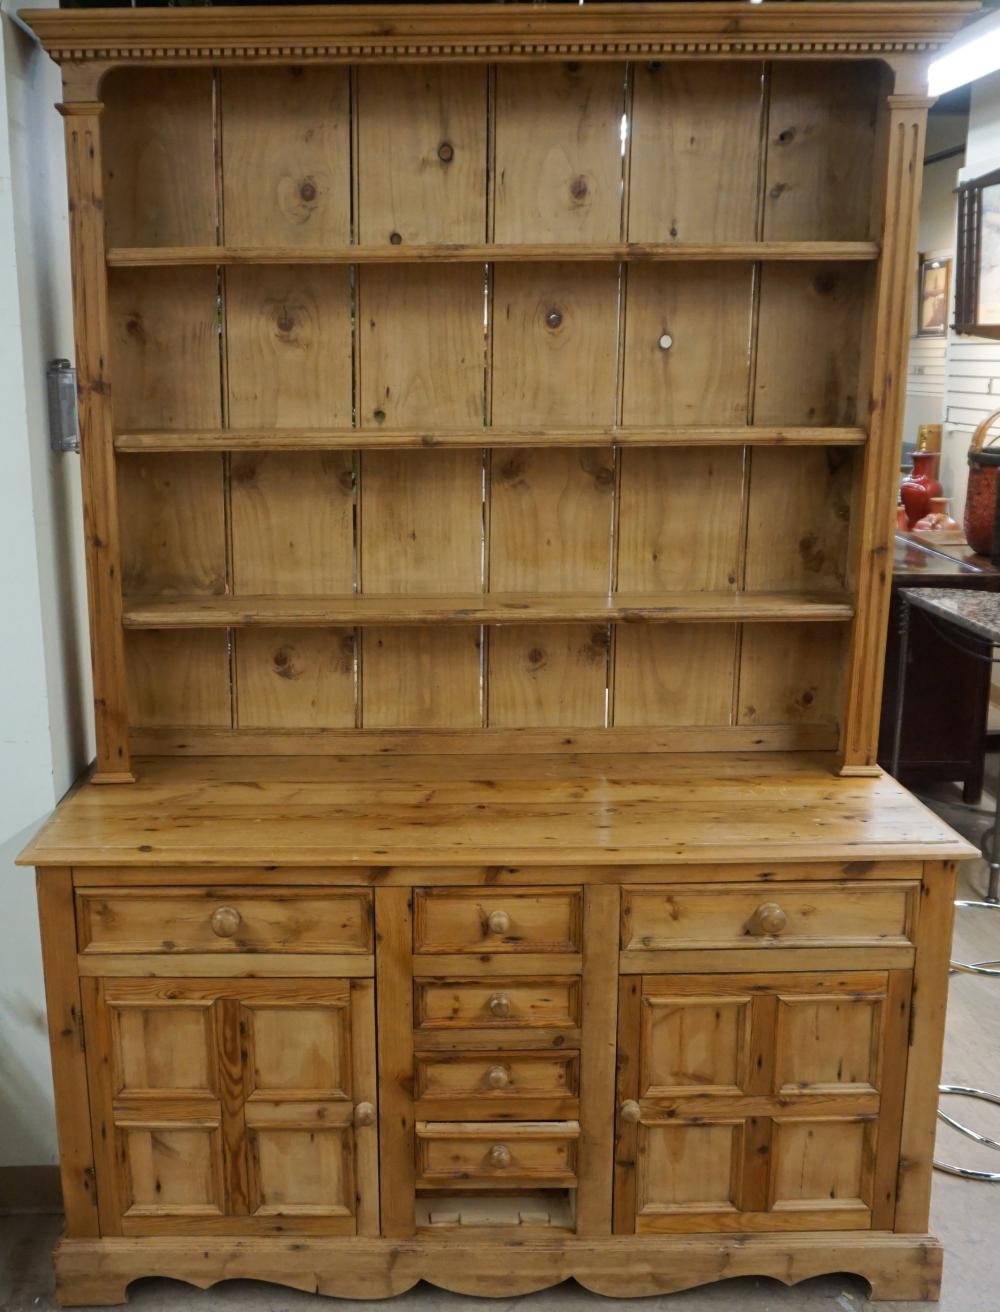 EARLY AMERICAN STYLE PINE HUTCH 32f738